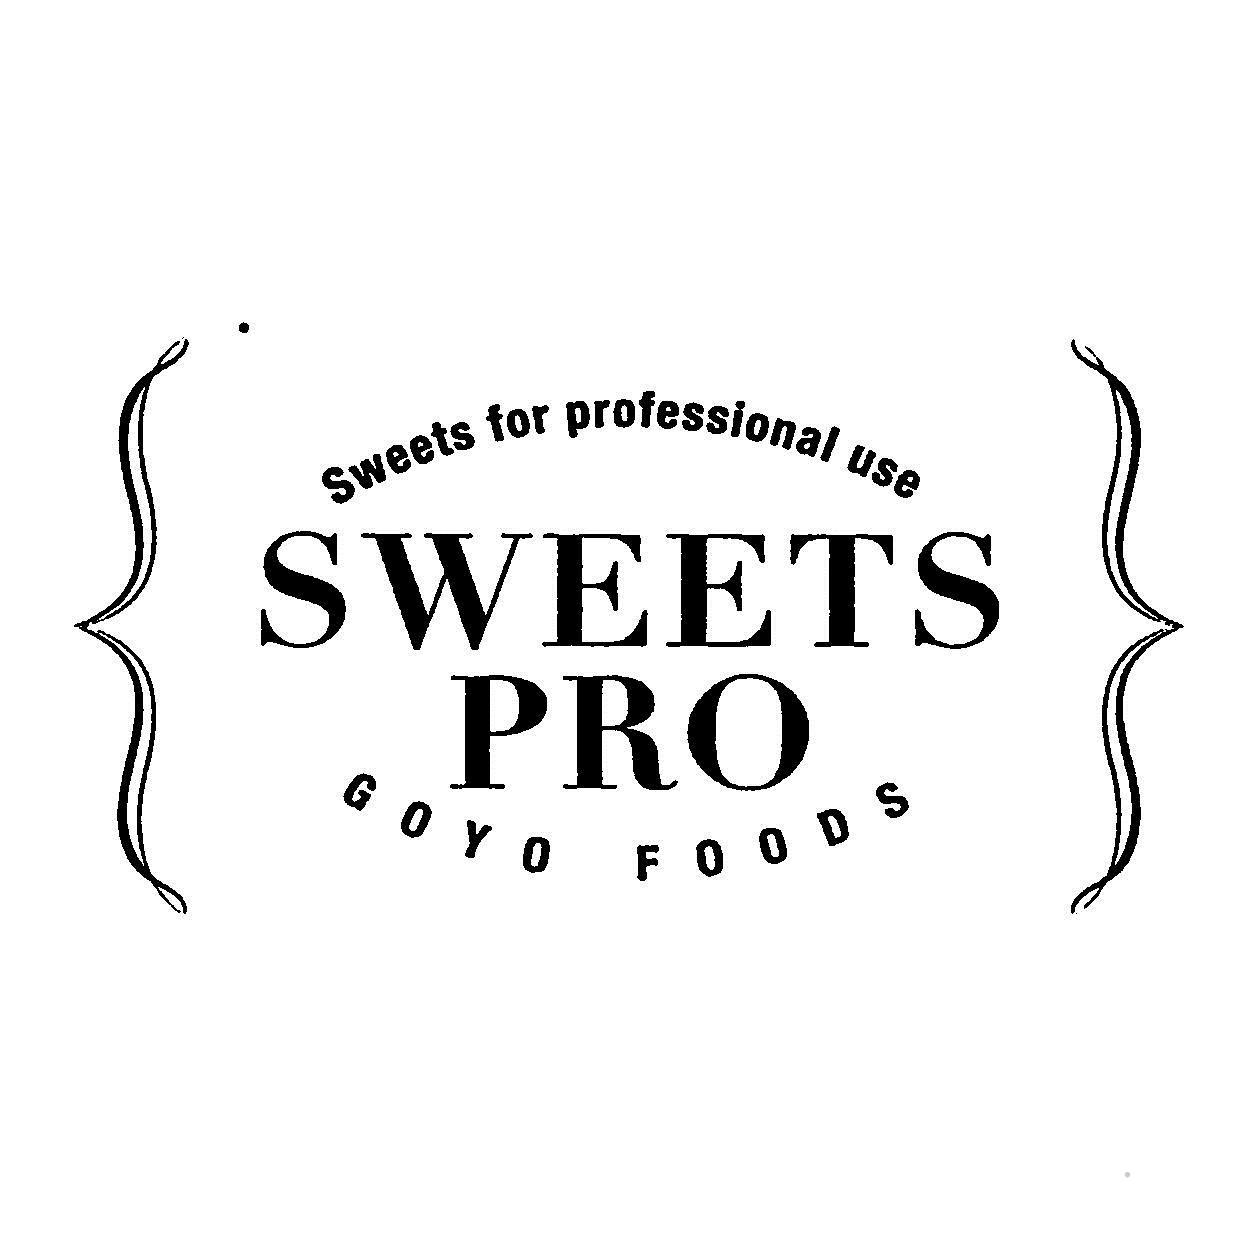 SWEETS FOR PROFESSIONAL USE SWEETS PRO GOYO FOODSlogo